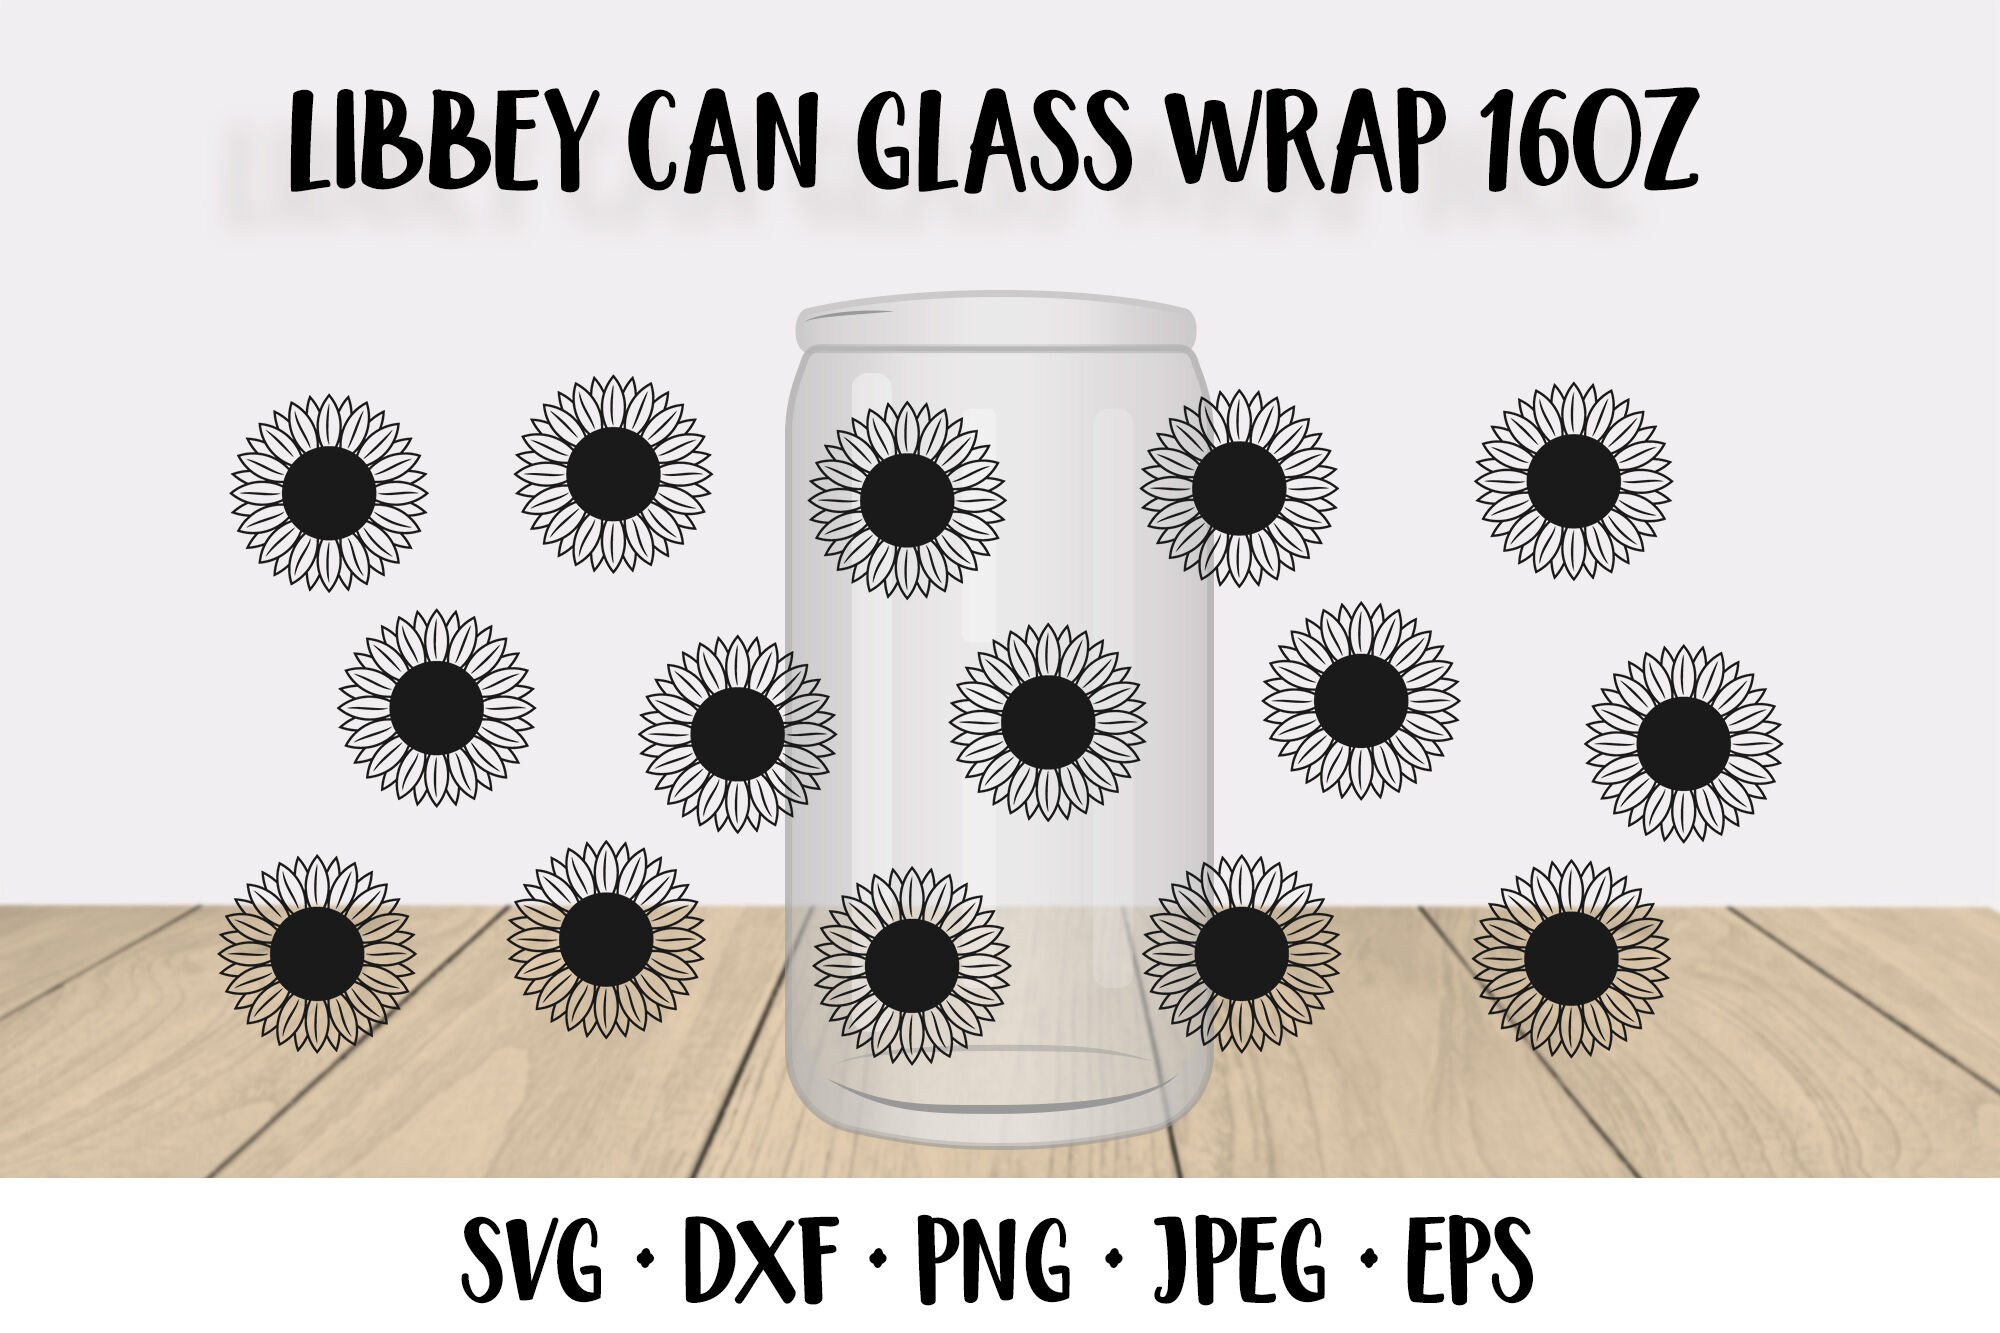 16oz Libbey Glass Can Full Wrap - Digital Download SVG Files For Cricut -  Silhouette - Wrap Template - Glass cup can Template